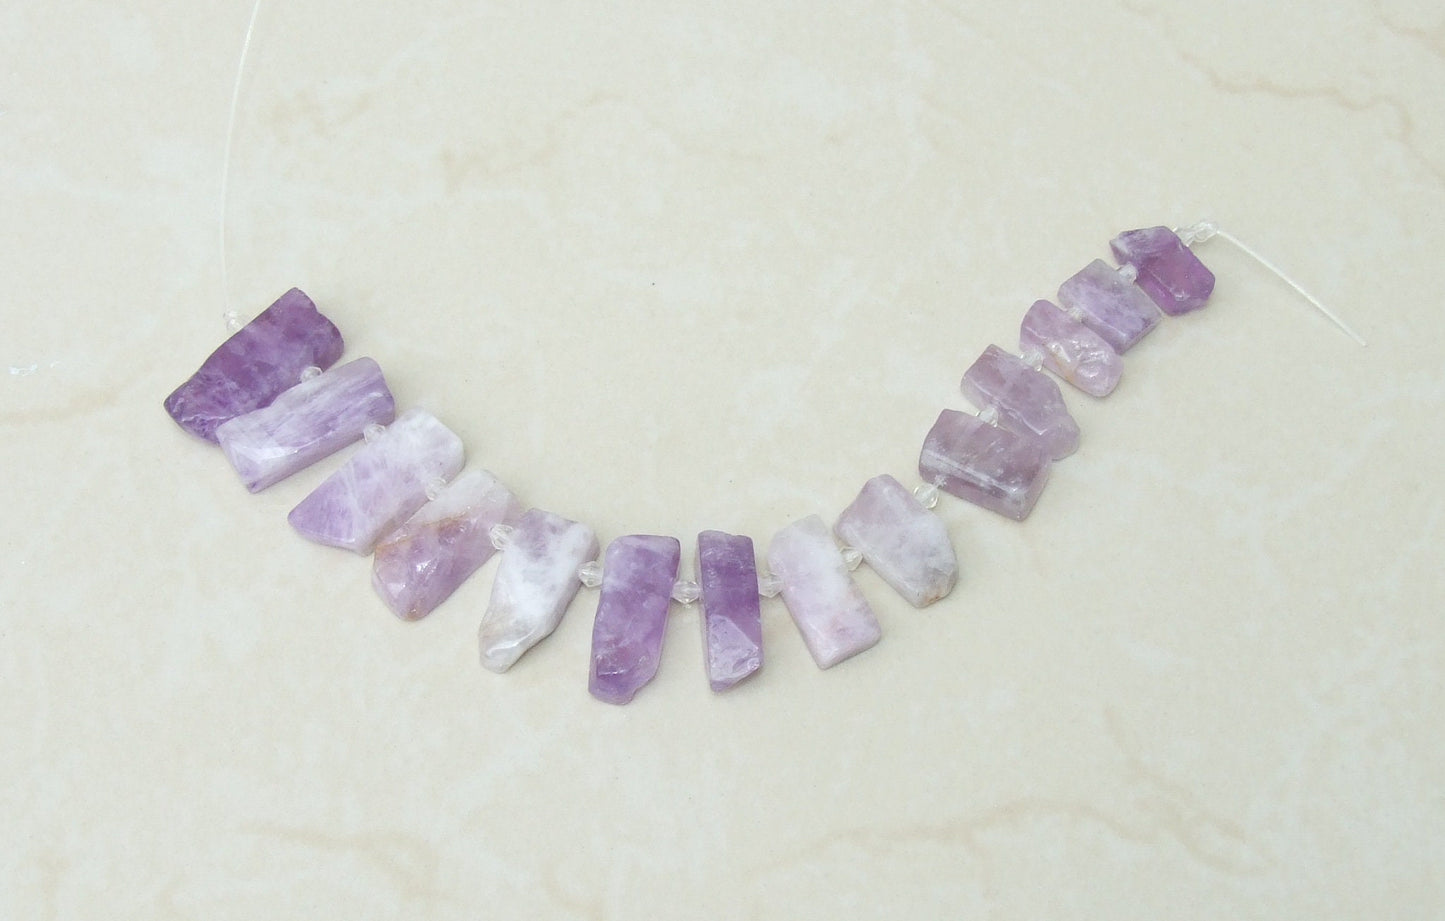 Amethyst Beads, Polished Natural Amethyst Slice, Amethyst Pendants, Gemstone Beads, Amethyst Points Jewelry, Half Strand, 20mm to 29mm, 2123